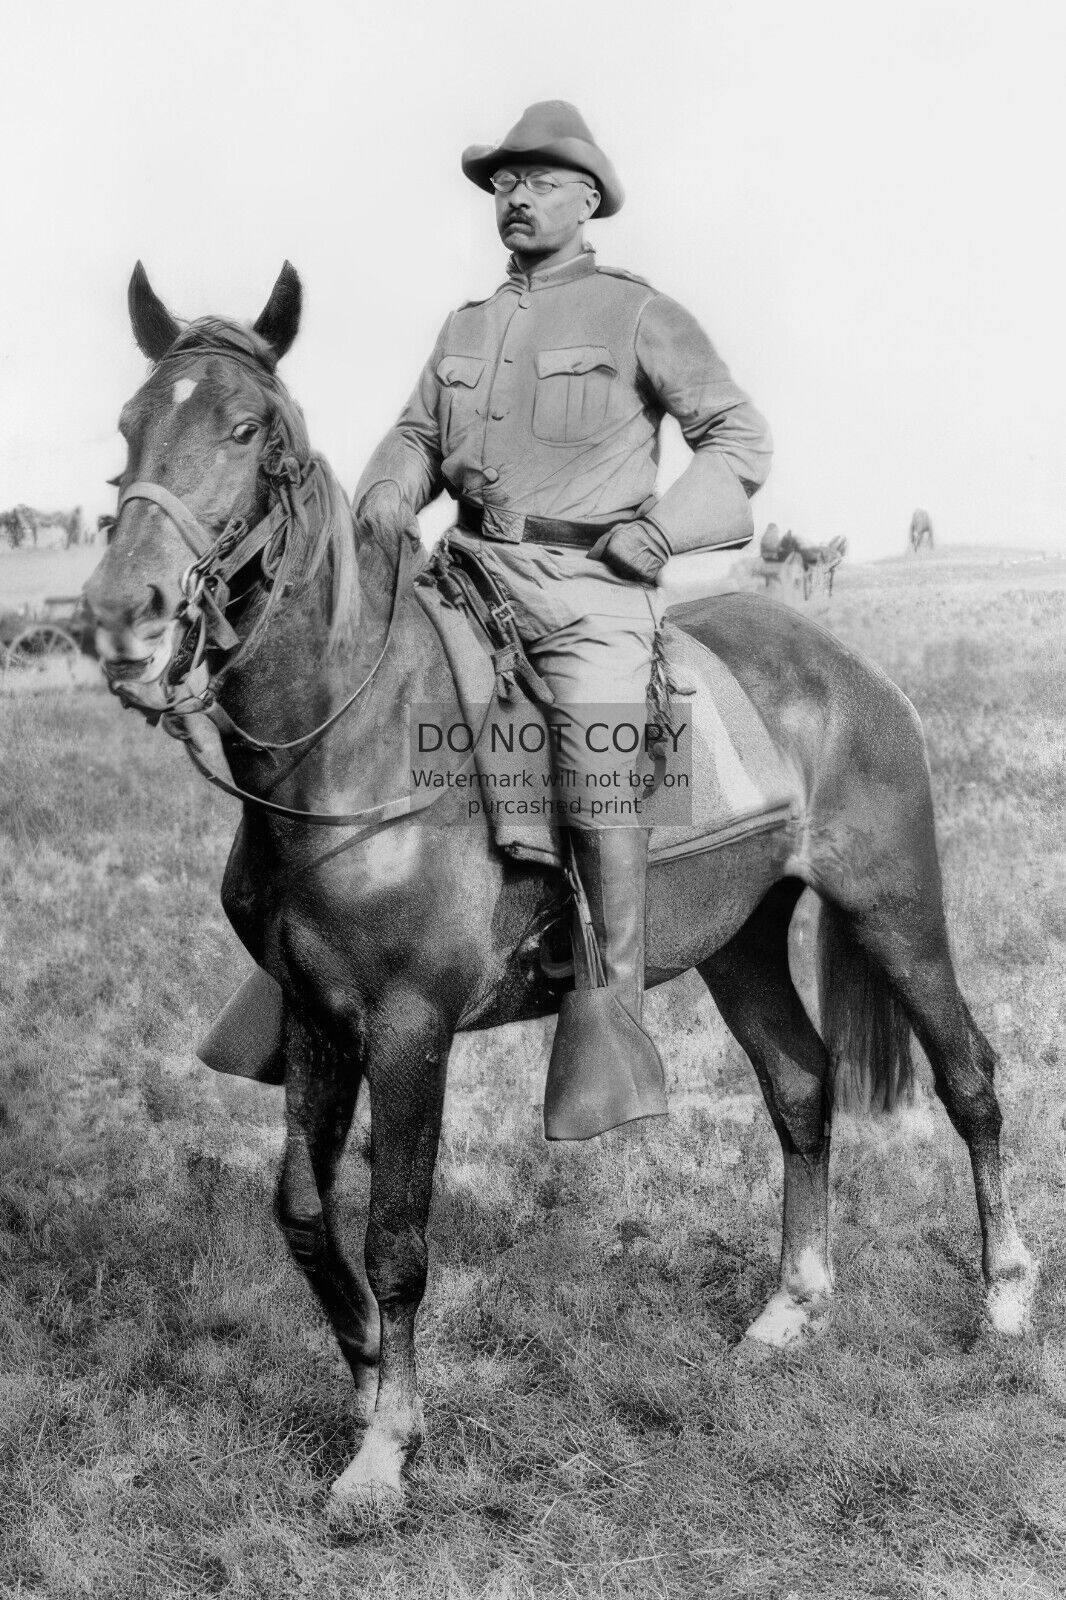 PRESIDENT THEODORE ROOSEVELT ROUGH RIDERS IN UNIFORM ON HORSE 4X6 PHOTO POSTCARD